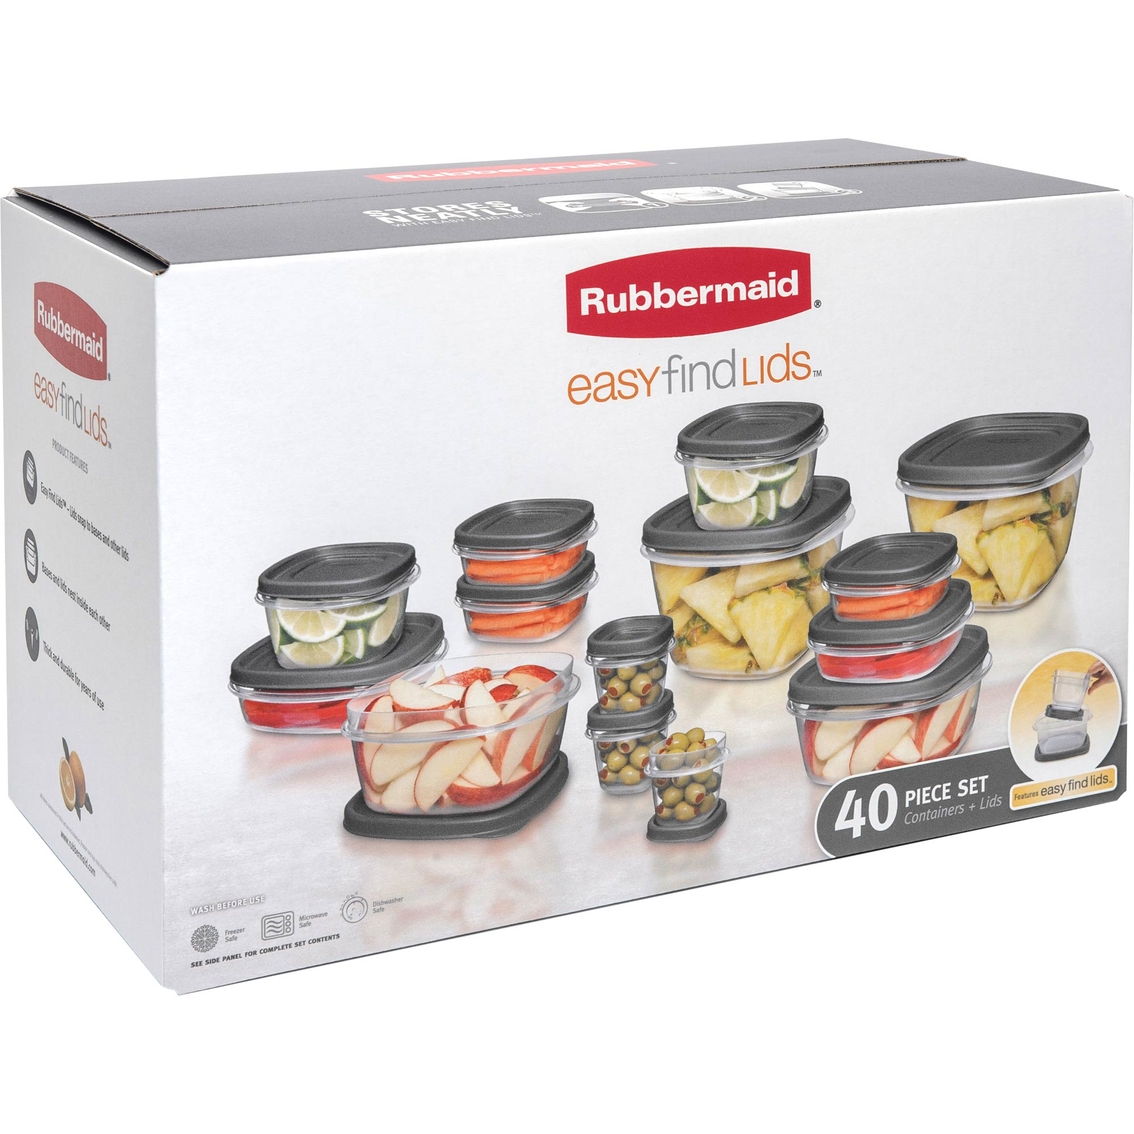 Rubbermaid Easy Find Lids Food Storage Containers Set 24 ct